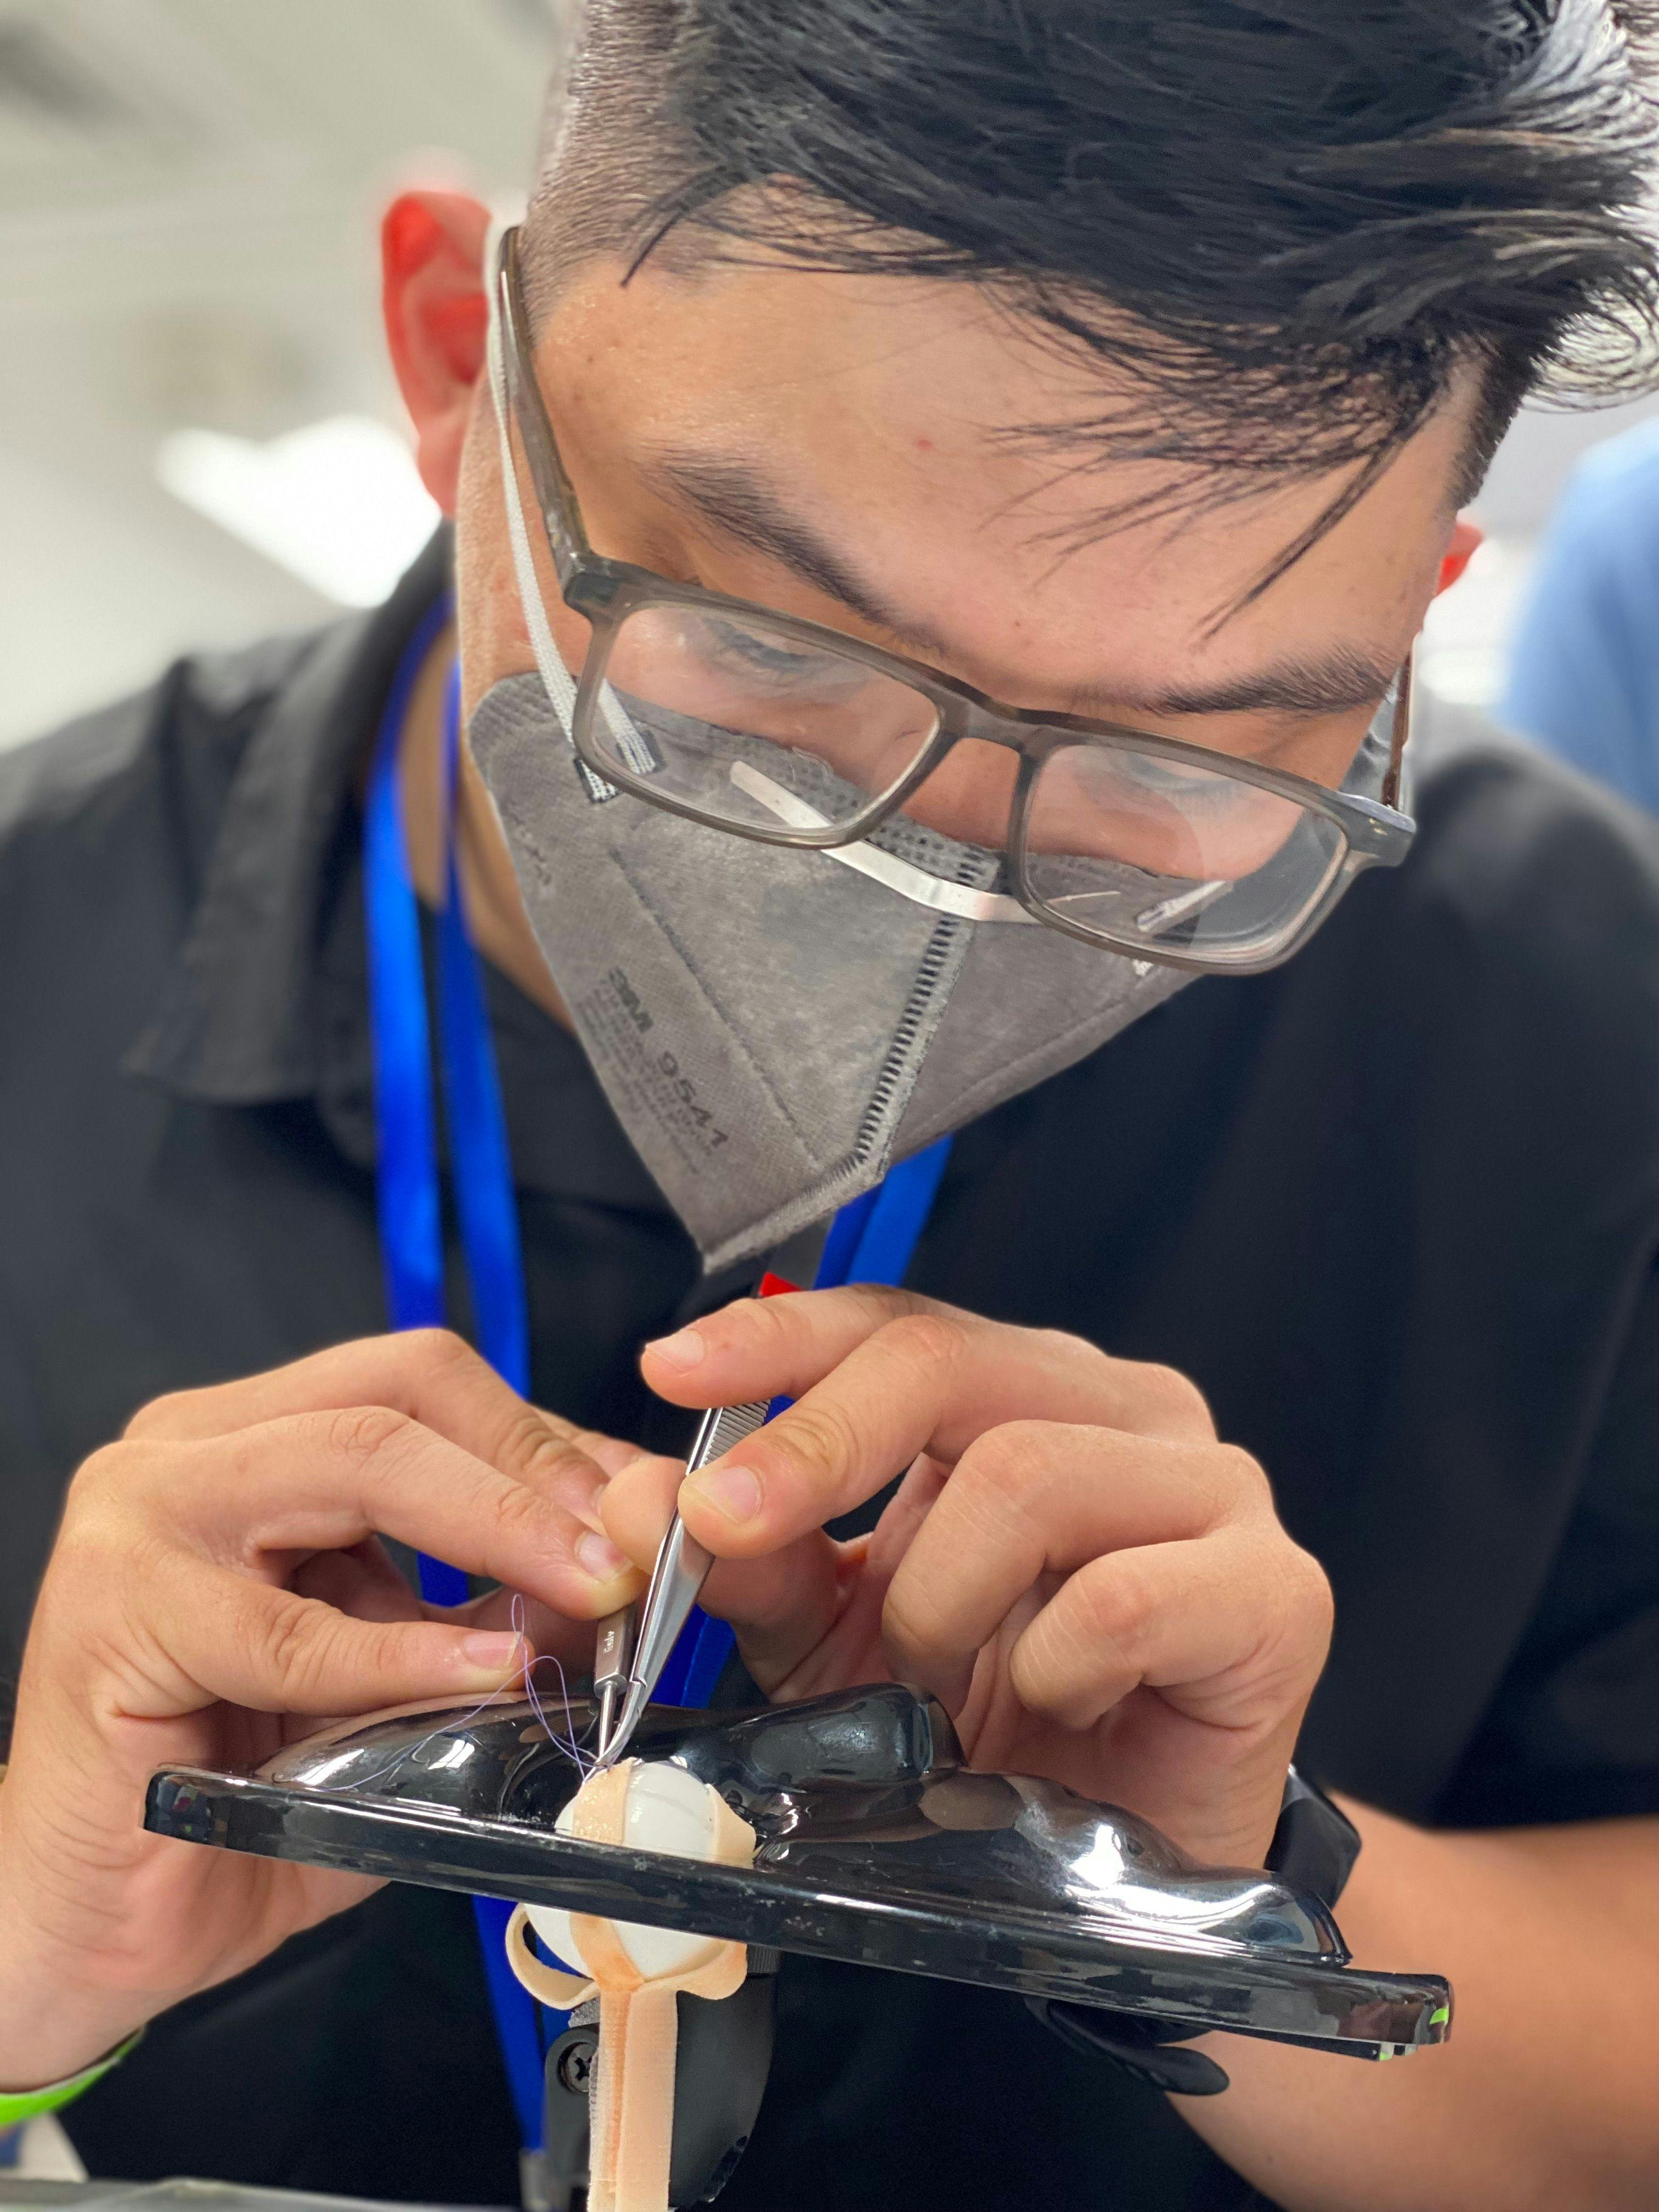 A doctor is practicing strabismus surgery skills on an artificial eye in Can Tho, Vietnam on board the Orbis Flying Eye Hospital. (Image courtesy of Orbis International)